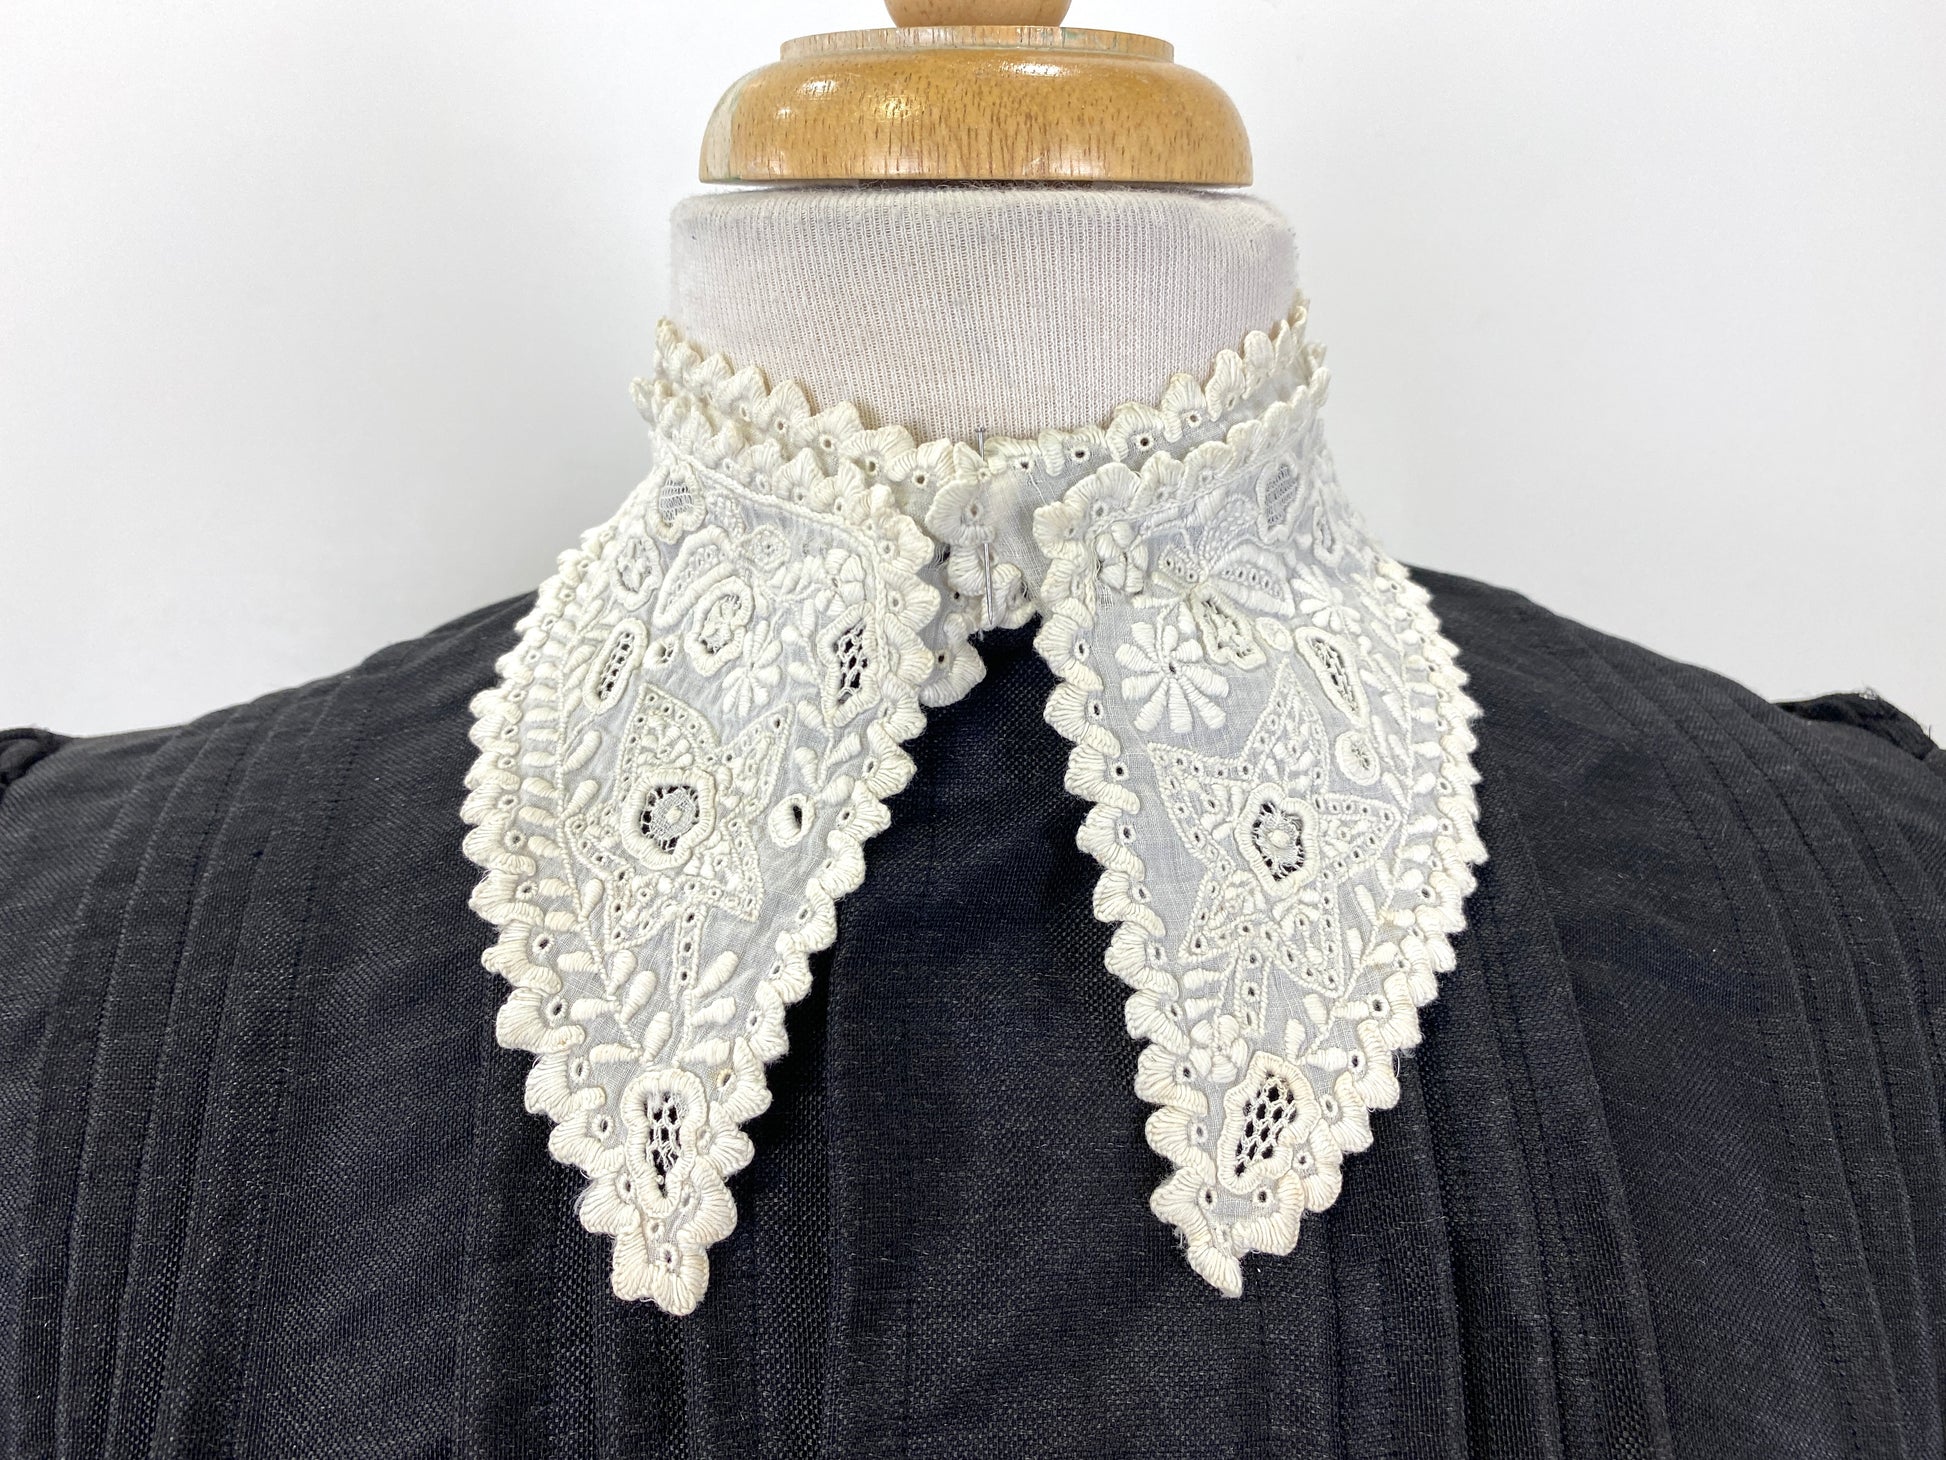 Antique Edwardian White Cotton Floral Embroidered Collar With Scalloped Edges